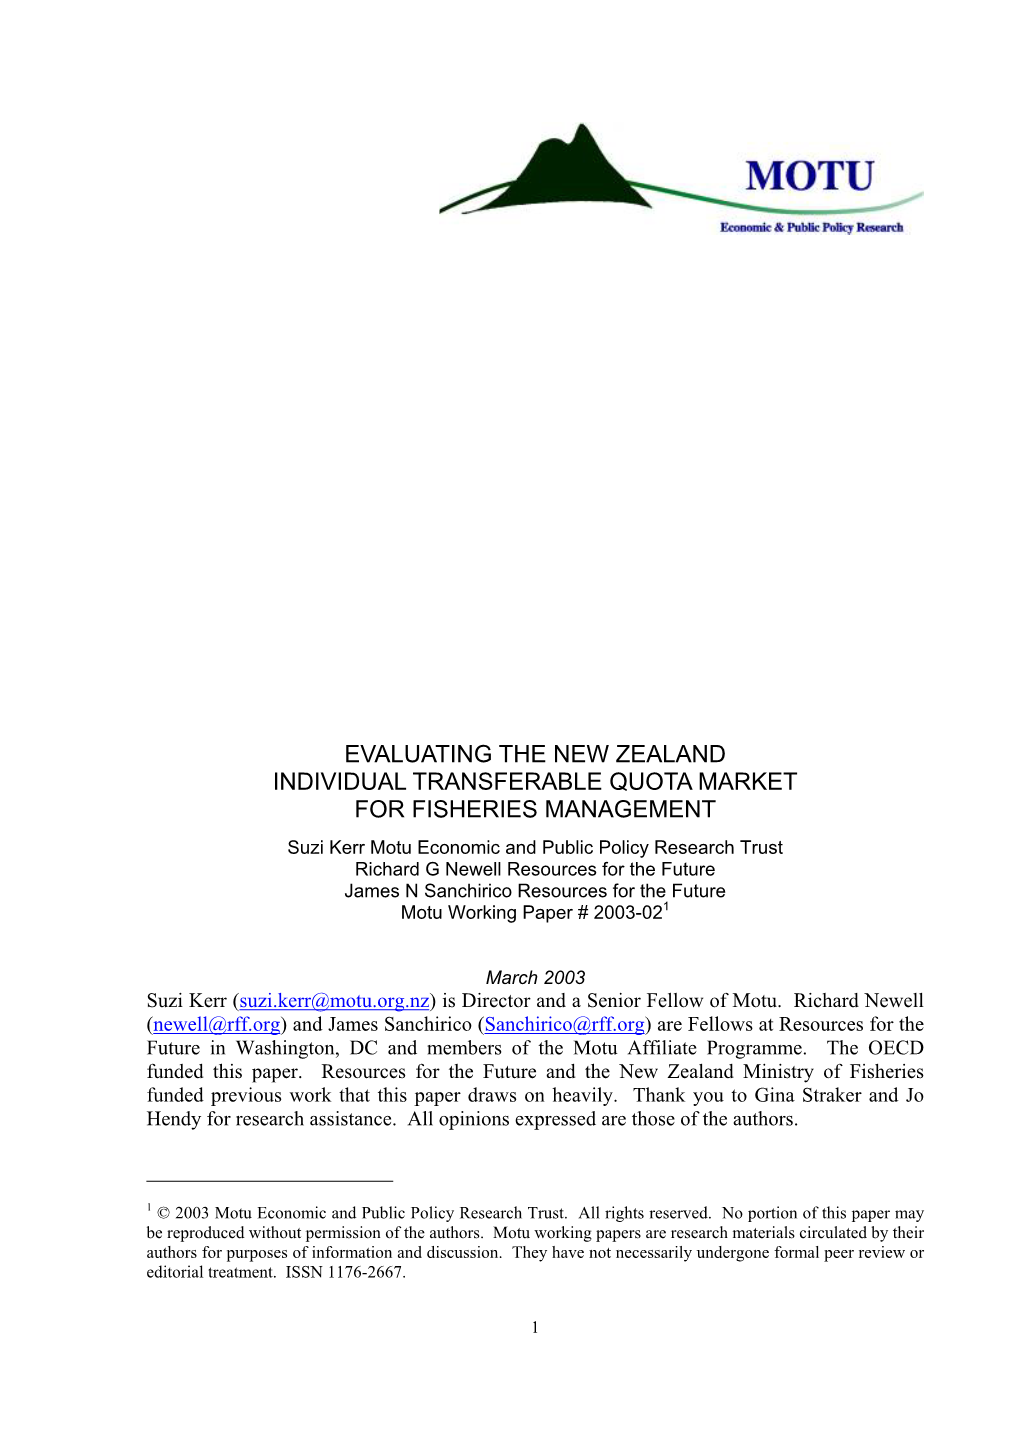 Evaluating the New Zealand Individual Transferable Quota Market for Fisheries Management